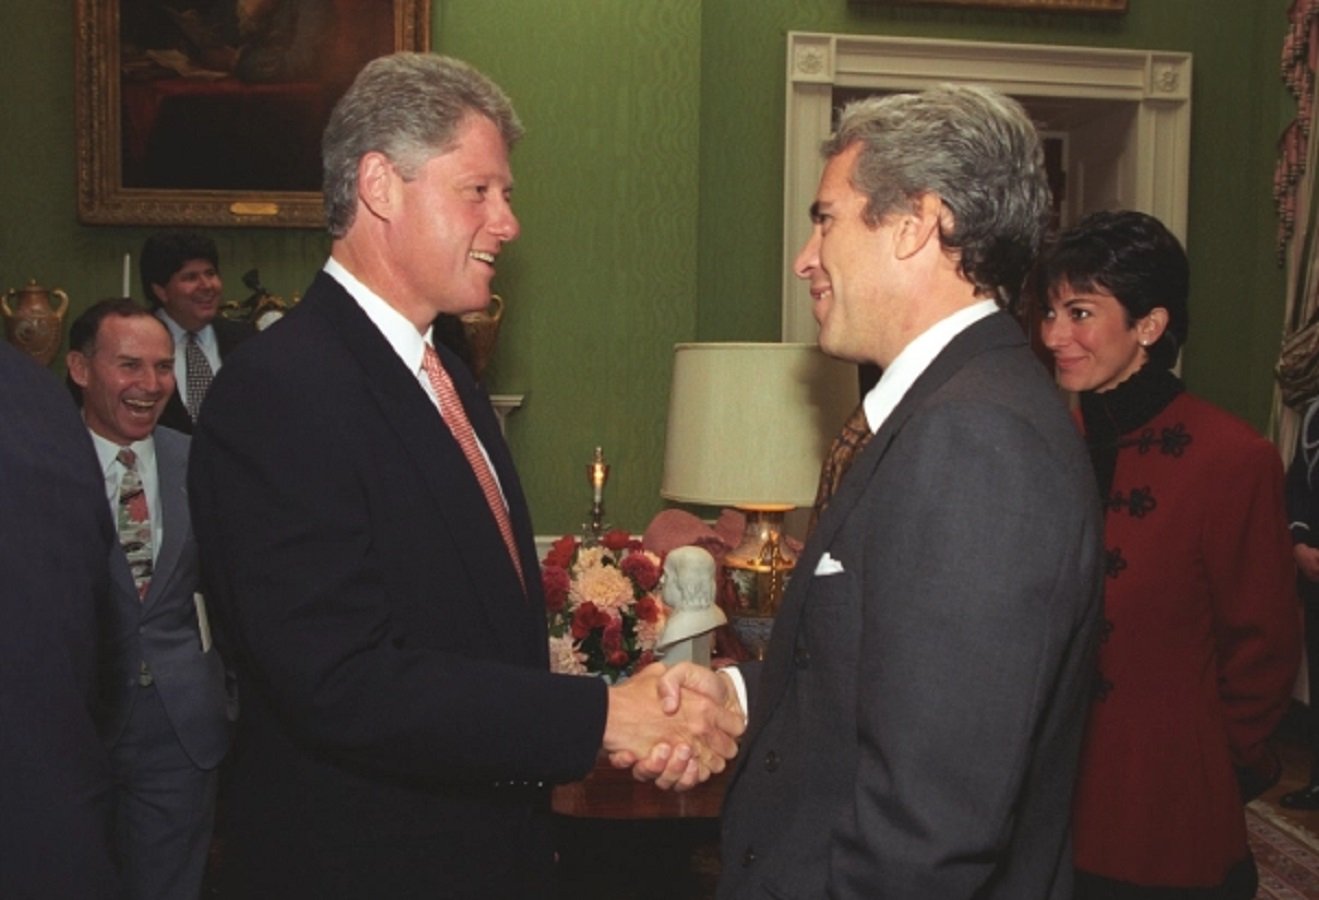 Never Before Seen Photos Reveal Jeffrey Epstein and Ghislaine Maxwell Were VIP Guests in Bill Clinton’s White House